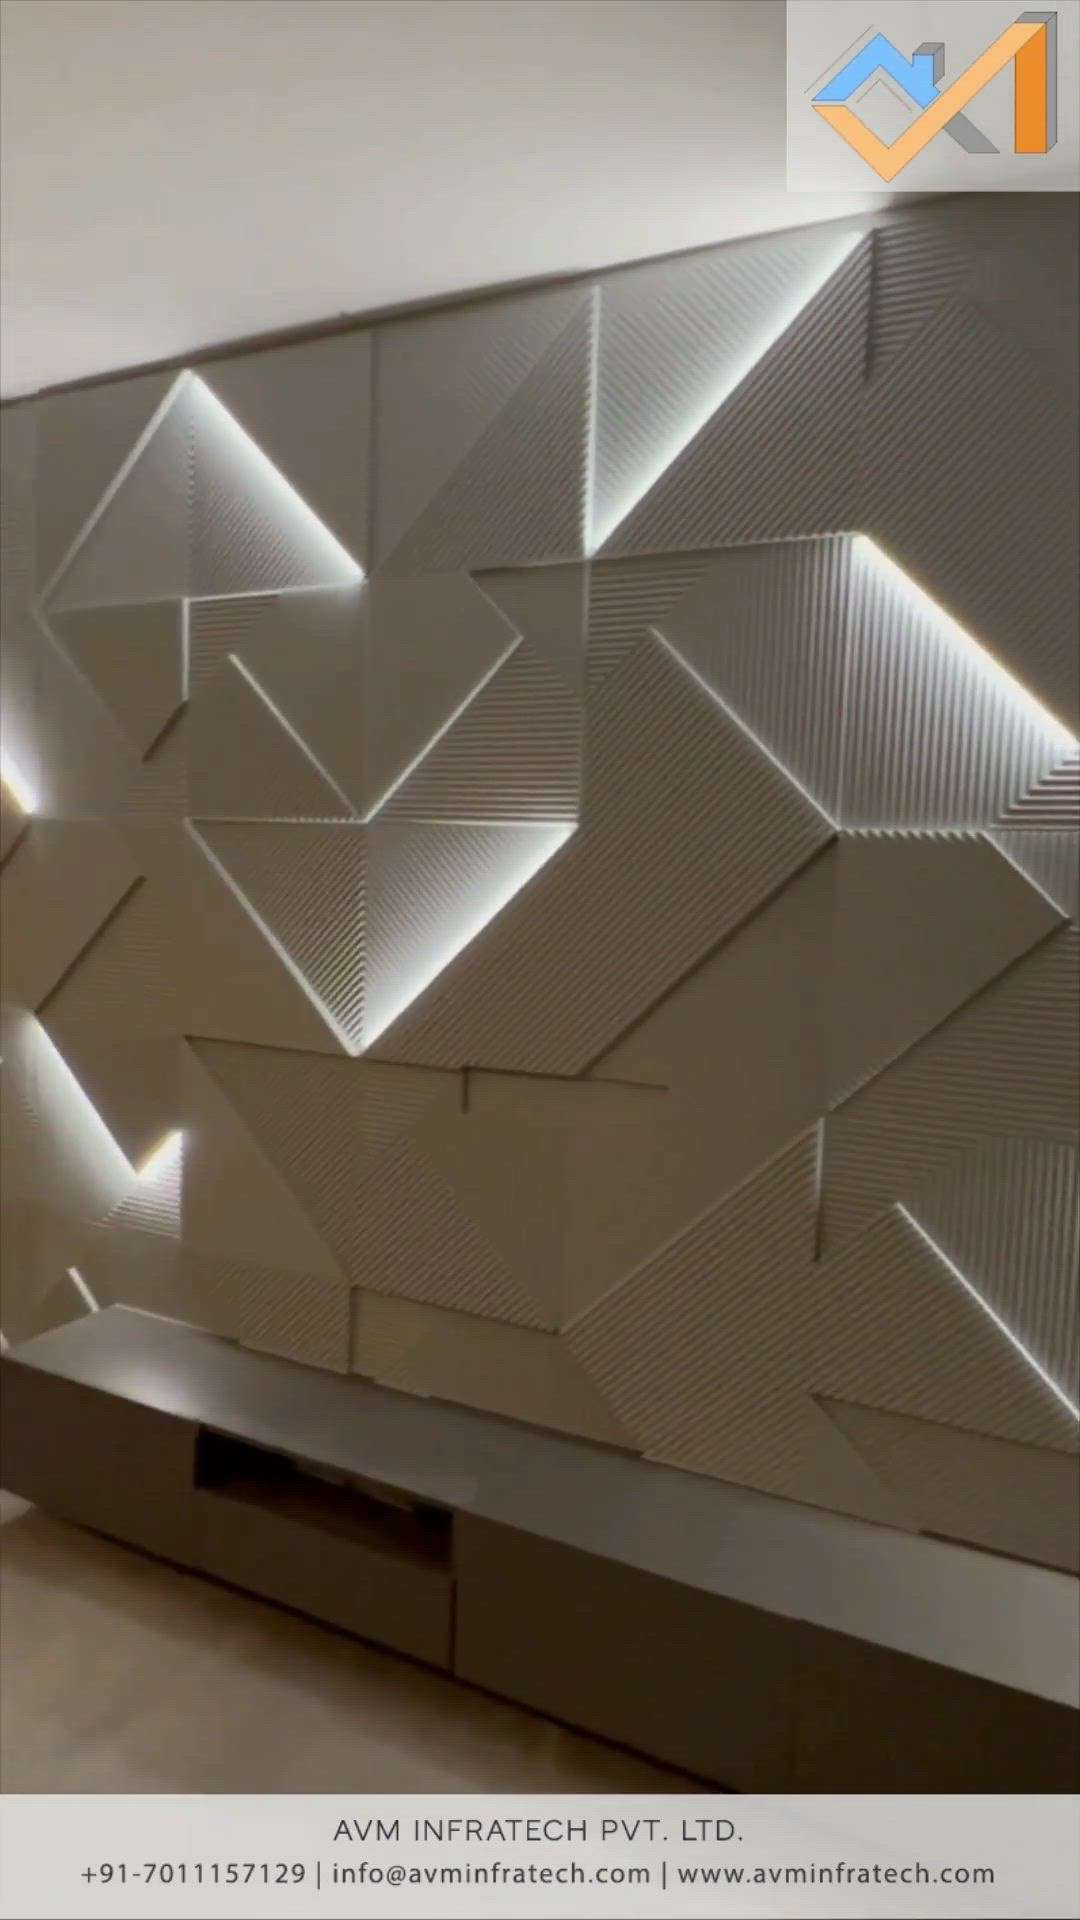 The WPC interior wall panel come a myriad of designs, materials, shapes, and sizes and apply in virtually all areas anyone would think of. For instance, we have used in this TV paneling back-lit design.


Follow us for more such amazing updates. 
.
.
#wpc #wallpanel #myriad #design #materials #shapes #sizes #architect #architecture #interior #interiordesign #commercial #rooms #architectural #tvpanel #livingroom #luxurious #bedroomdecor #decor #designprocess #designinterior #walldesign #art #architecturedaily